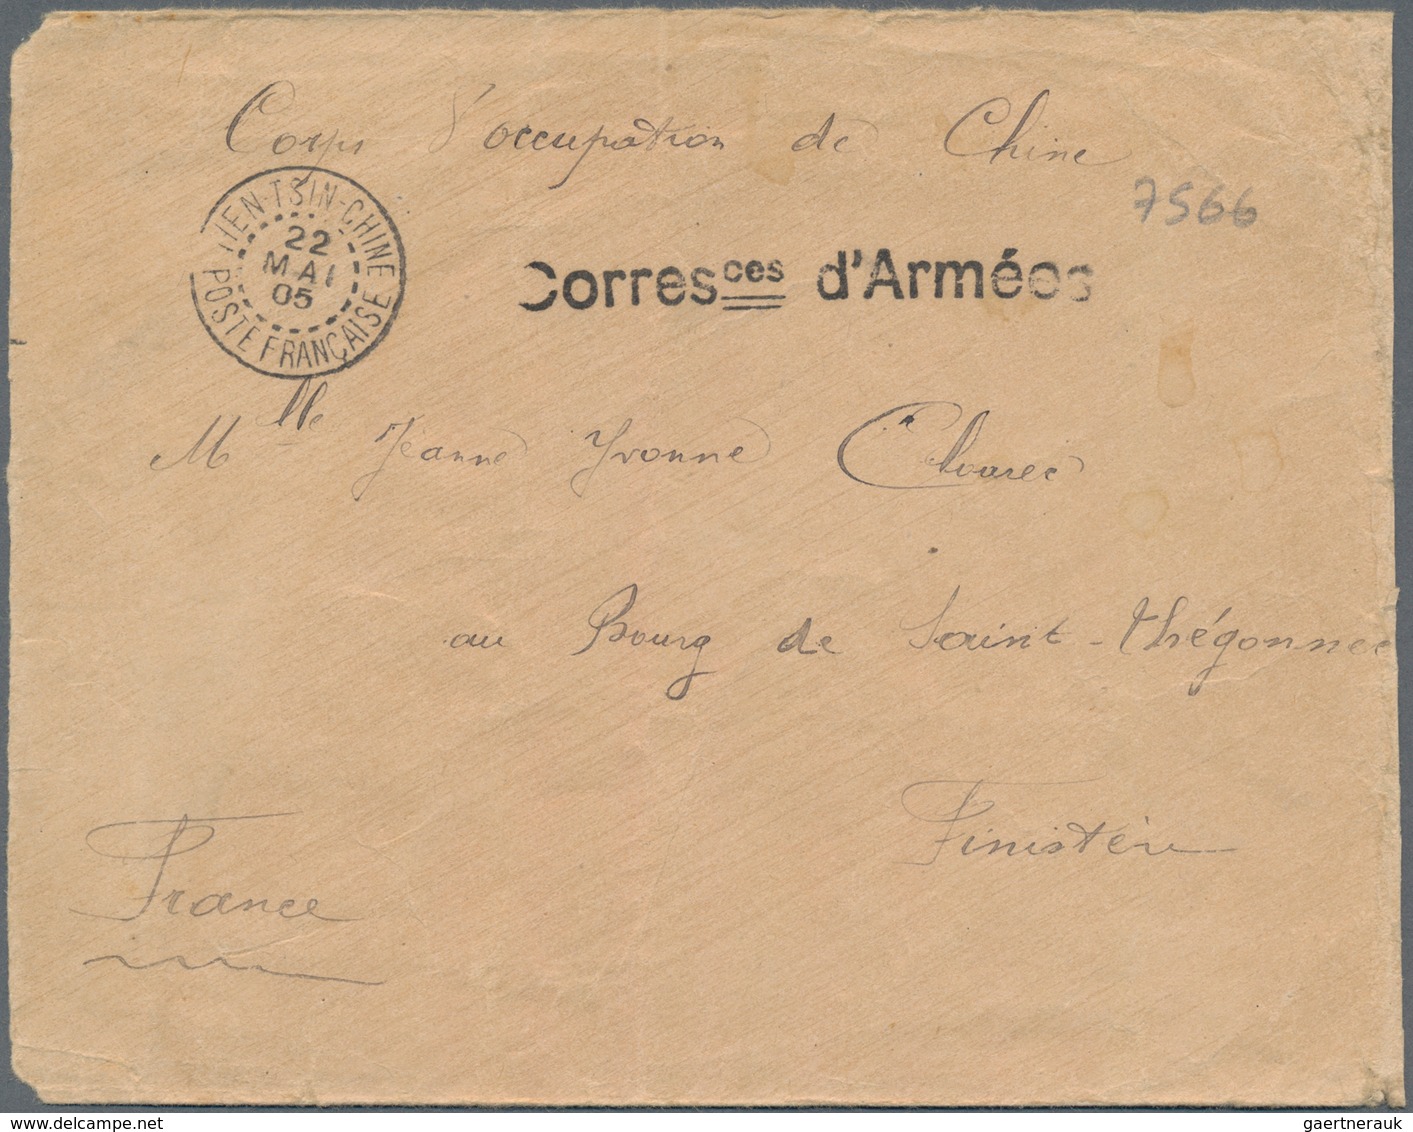 China - Fremde Postanstalten / Foreign Offices: 1904/05, Tientsin: covers (5) endorsed "Corps d'occu